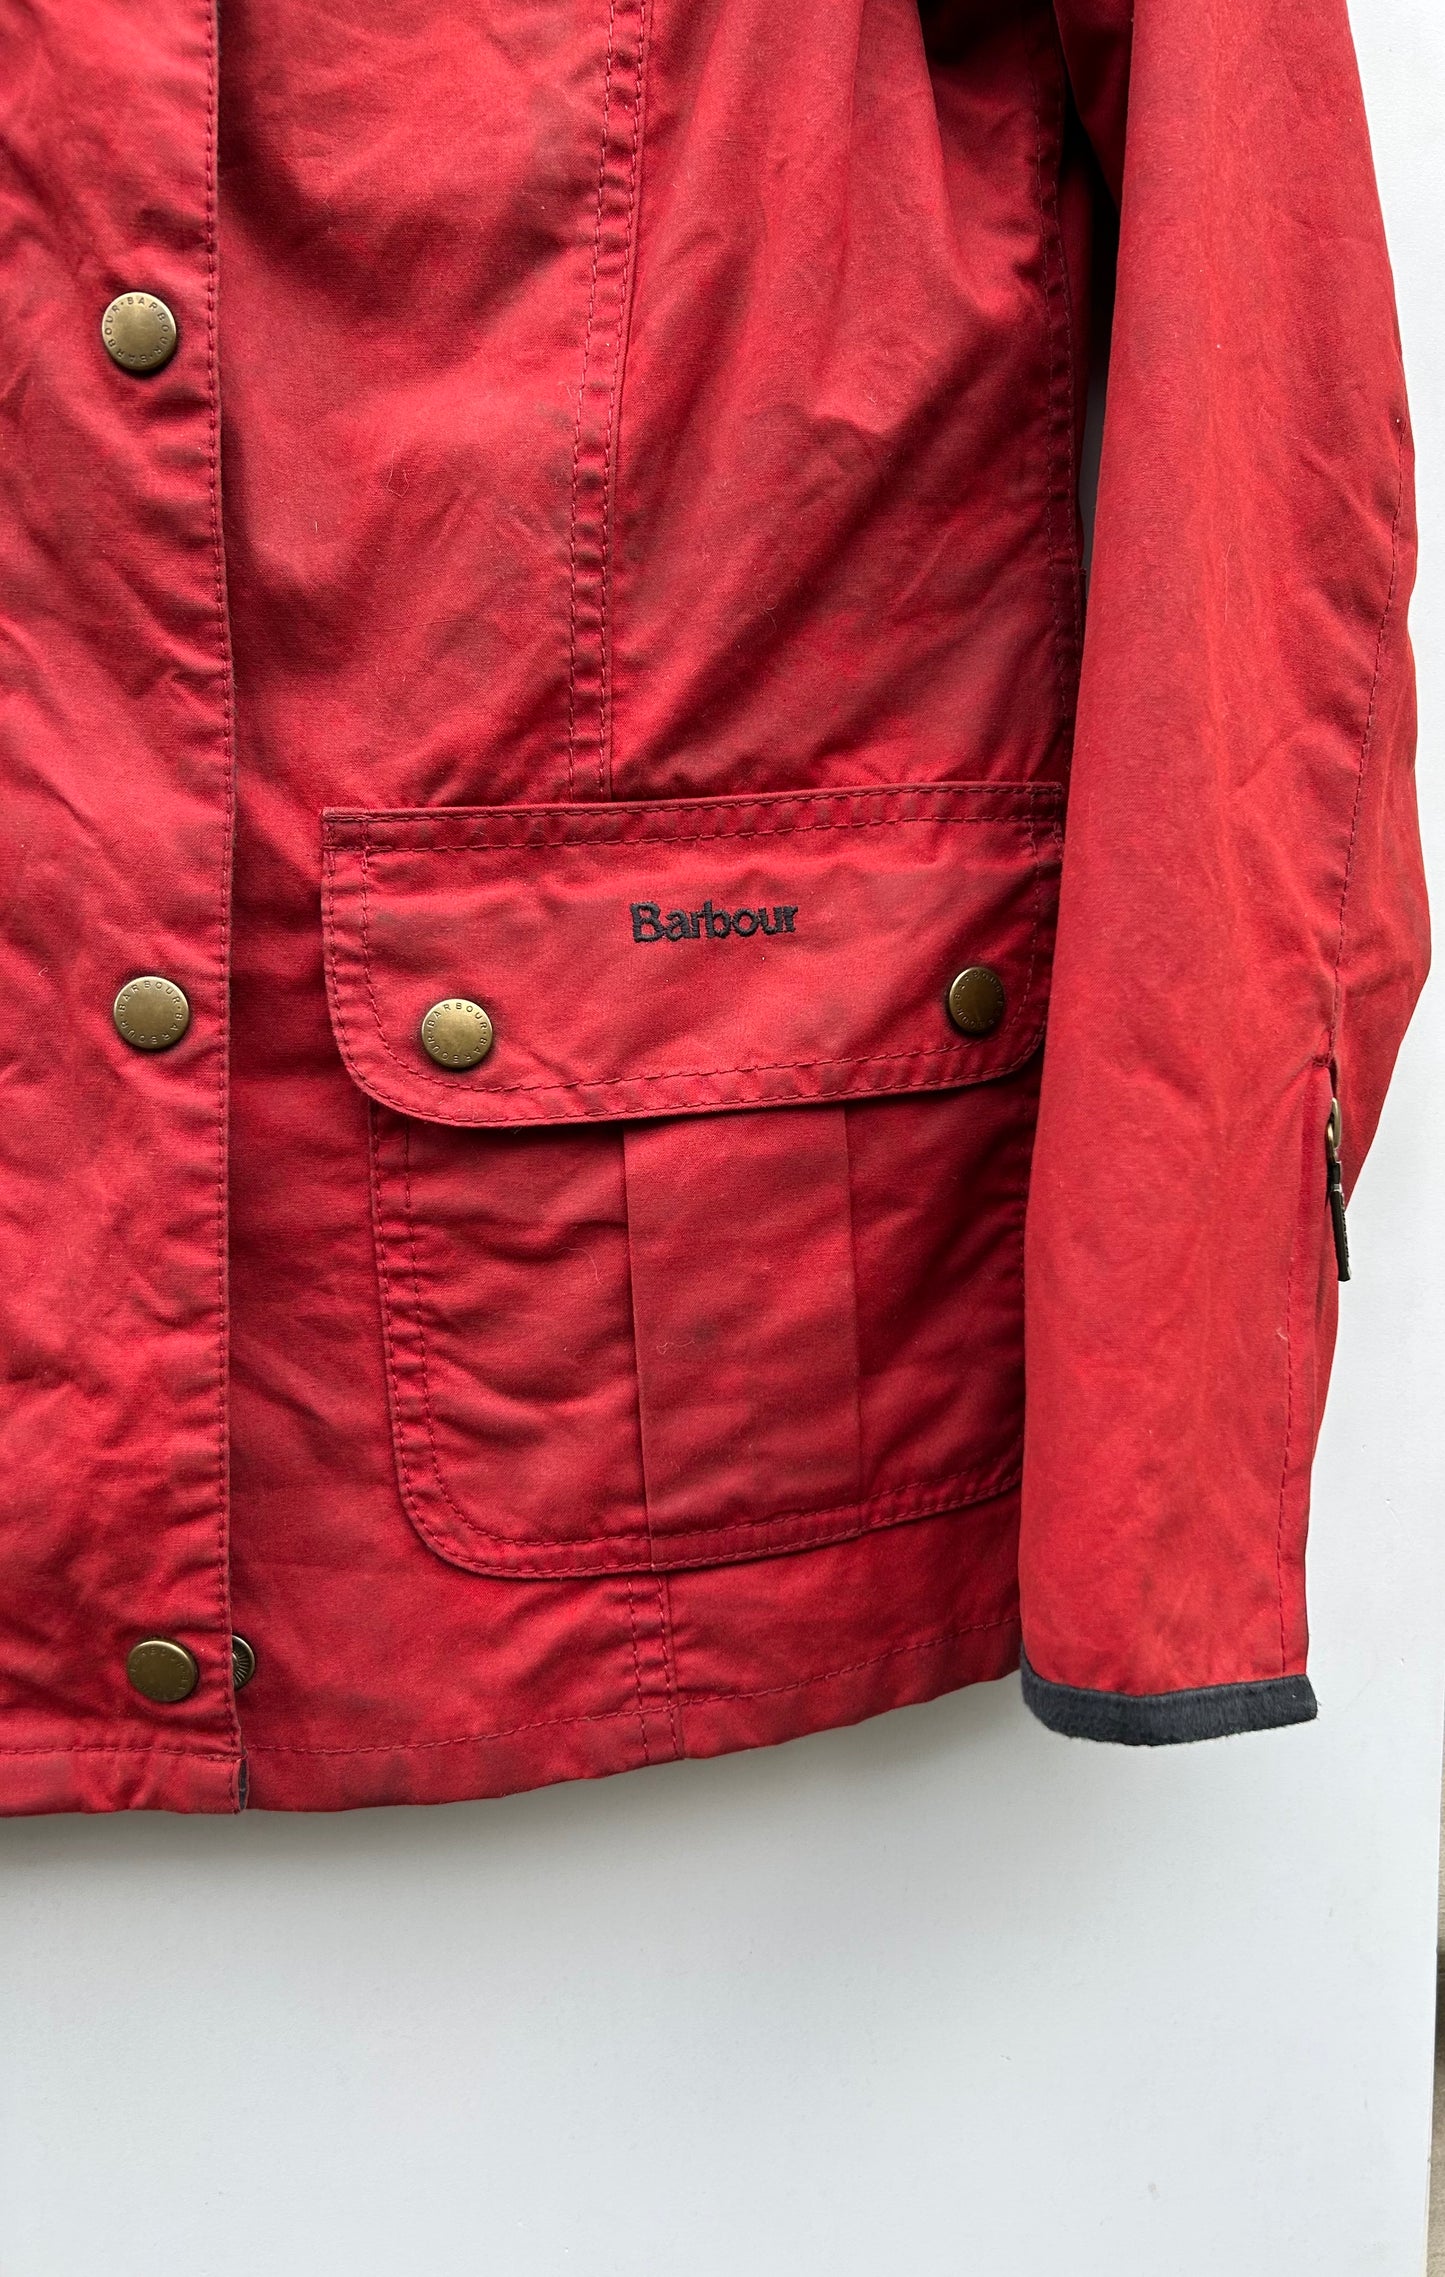 Barbour Giacca corta rossa donna Tg. 40 Morris Red Wax Utility Jacket Size UK10